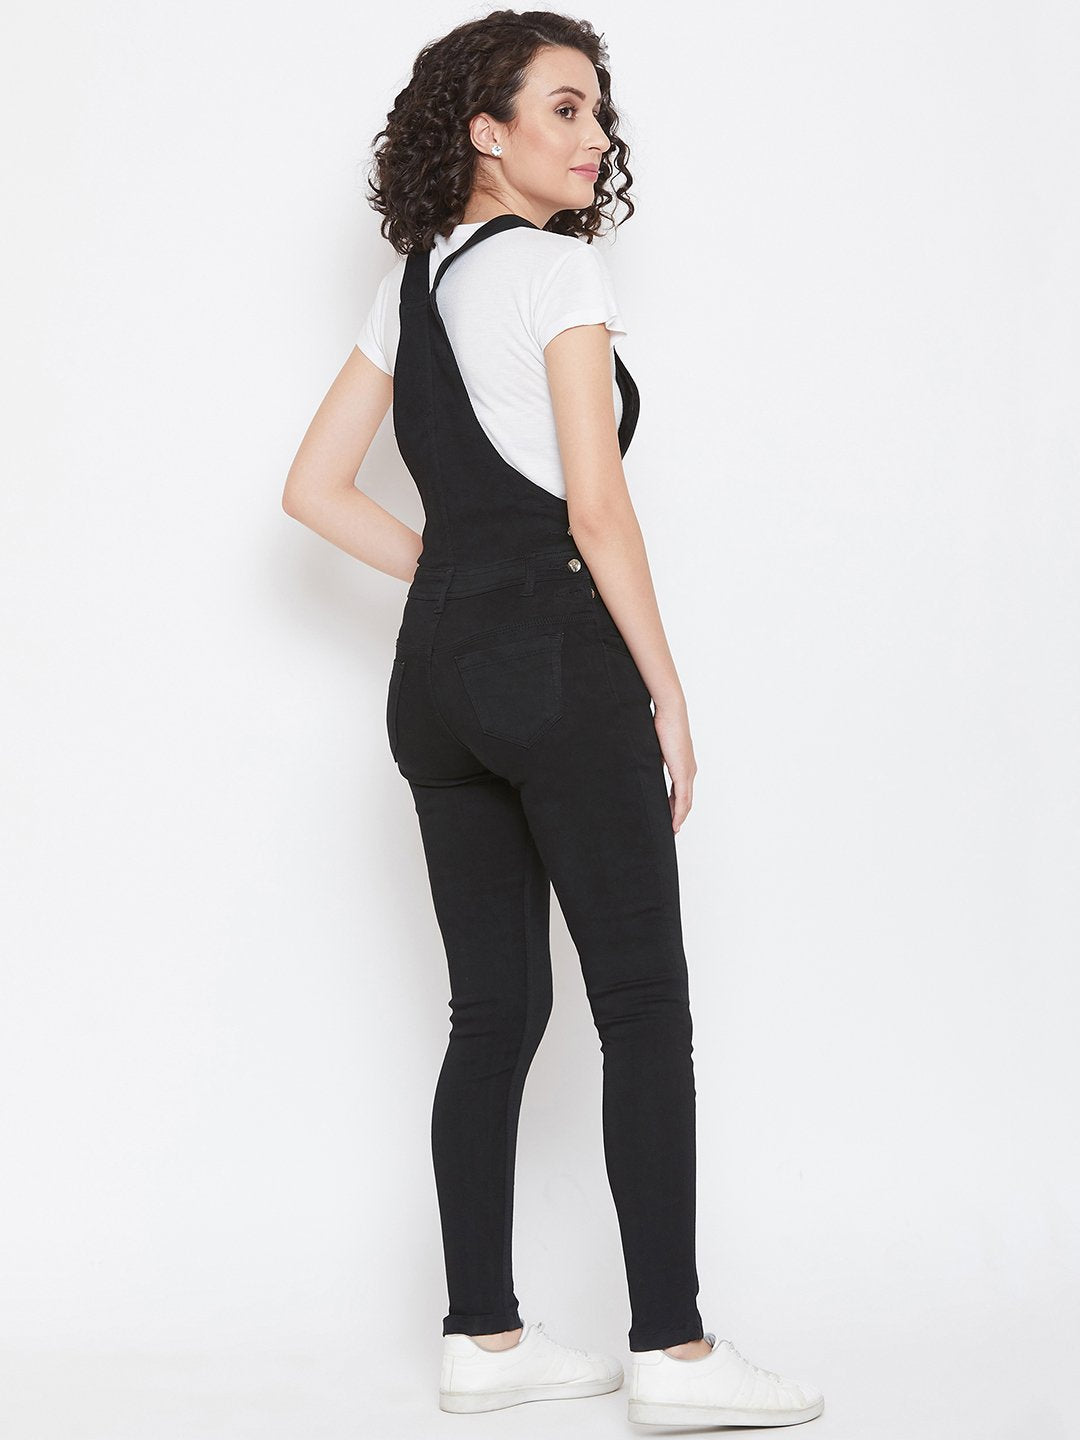 Slim Fit Stretchable Black Dungarees - NiftyJeans